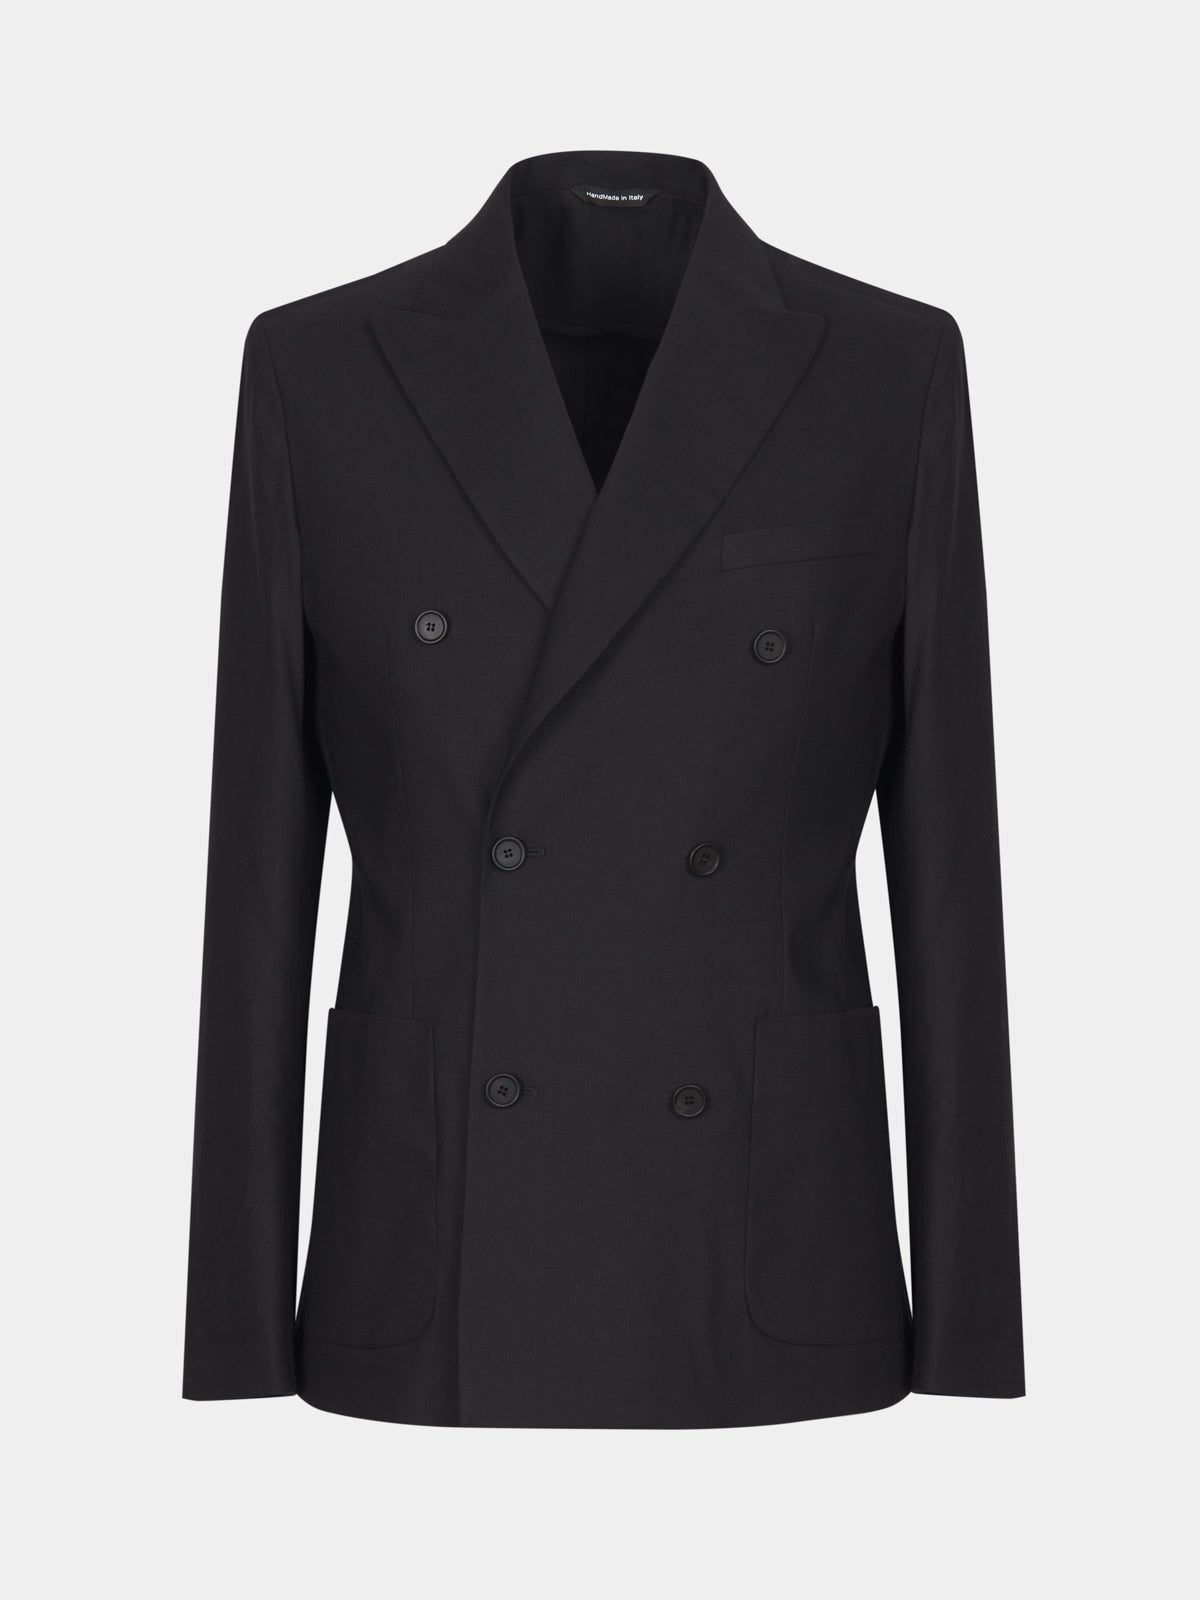 Double-breasted jacket in black stretch linen